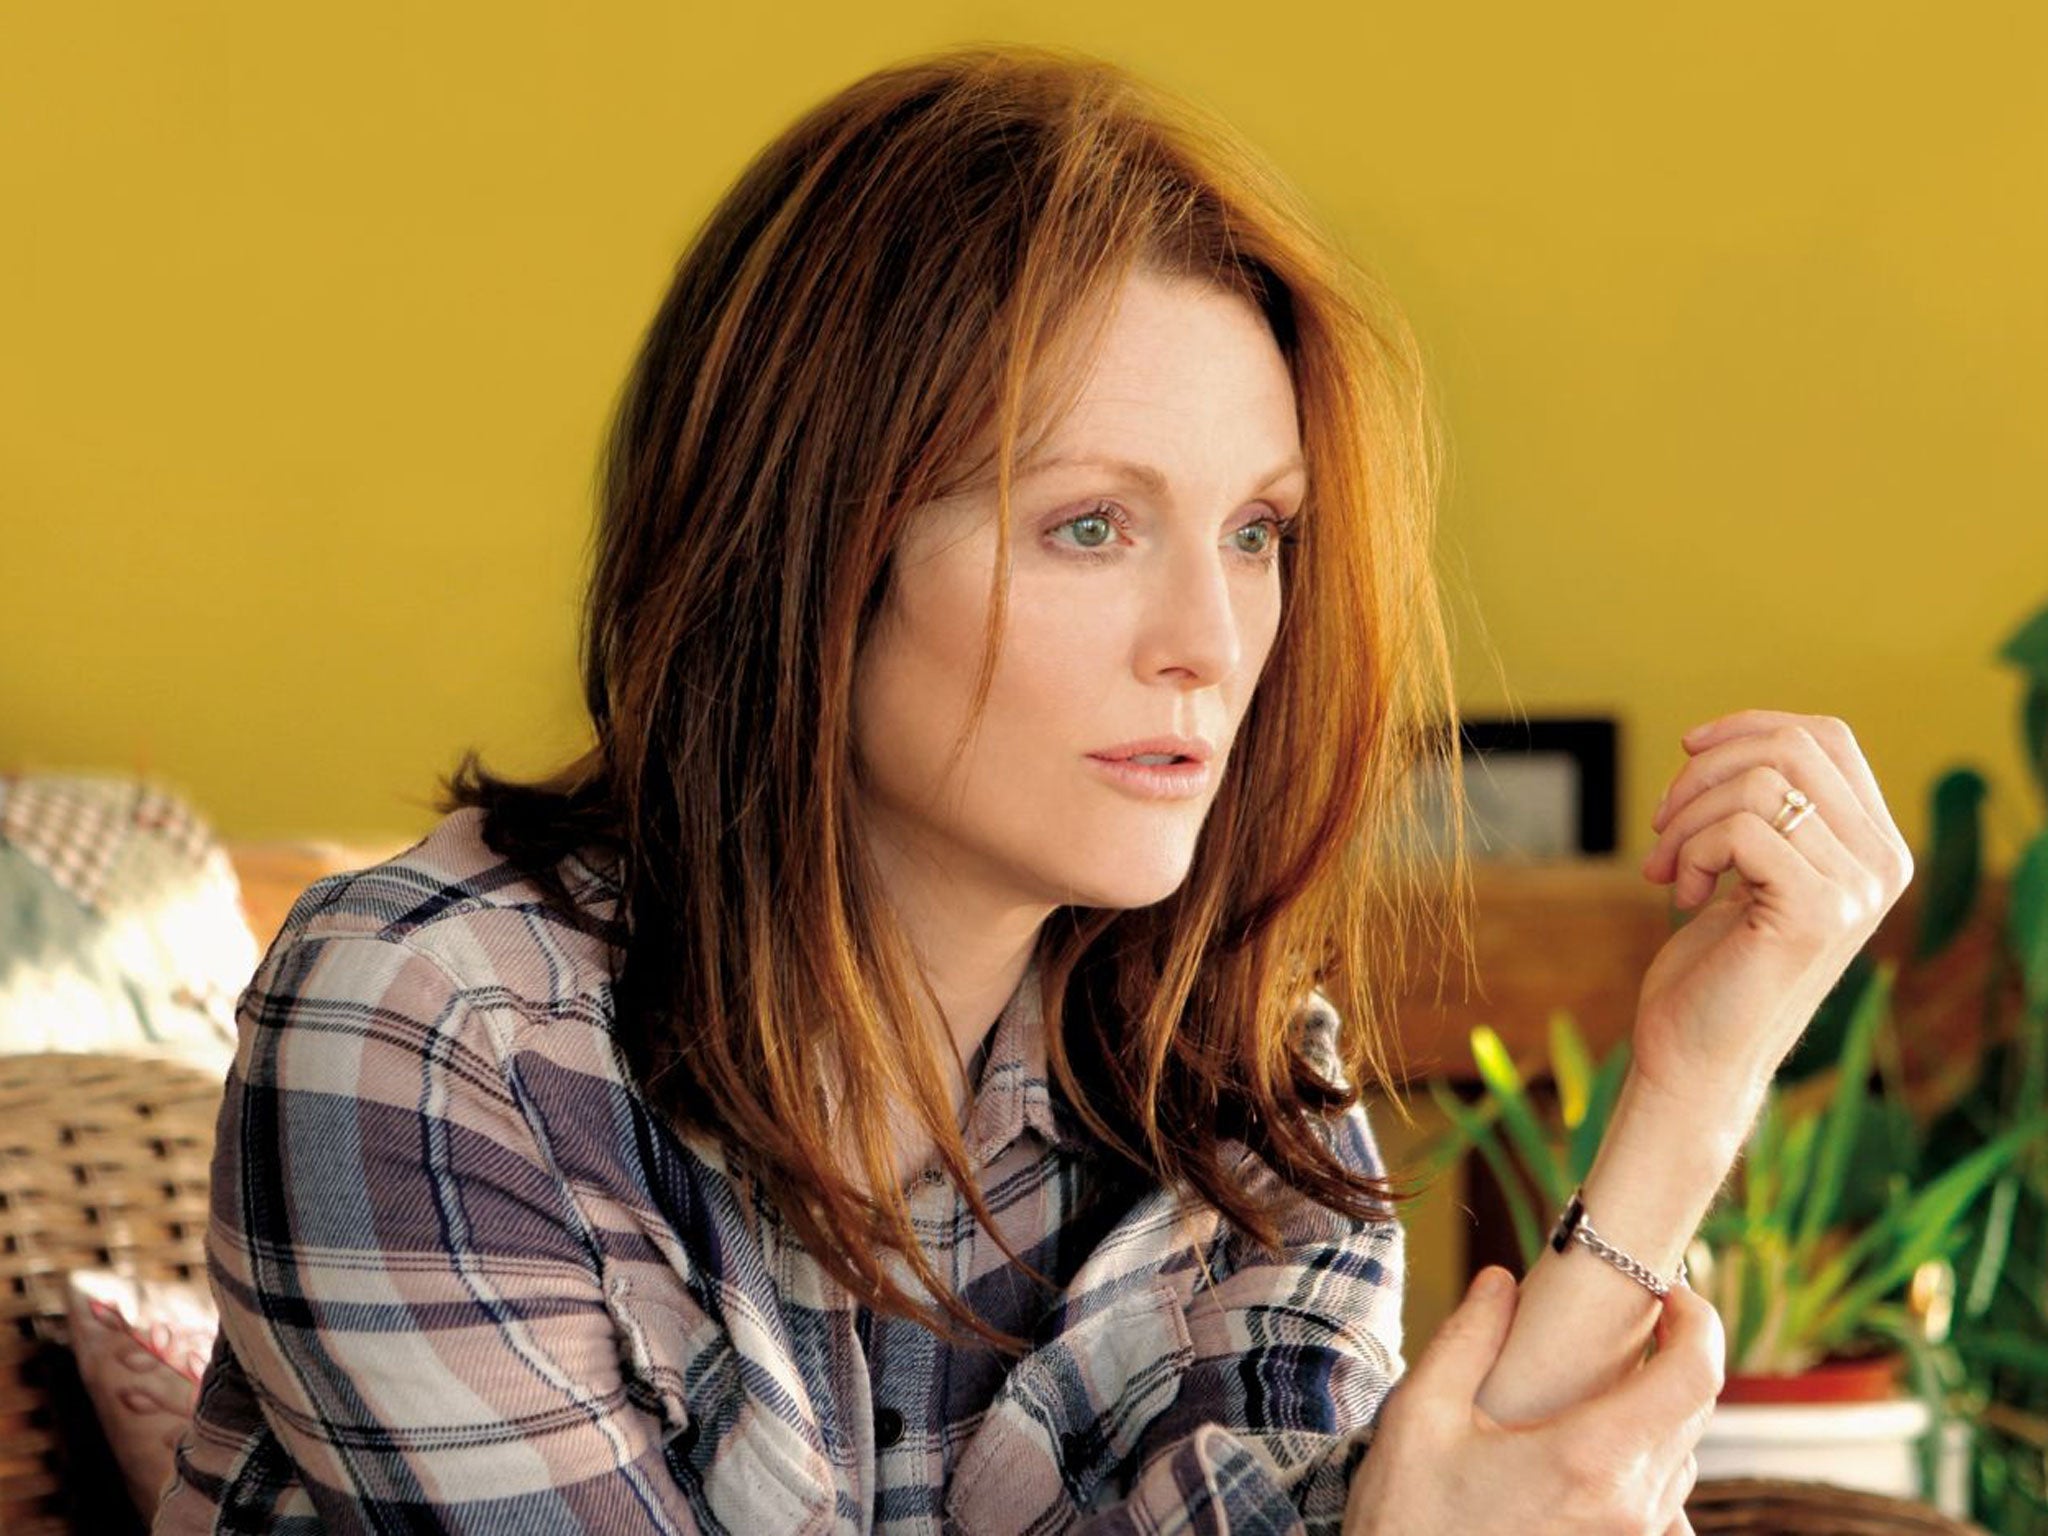 In 'Still Alice', Julianne Moore plays a woman with Alzheimer's